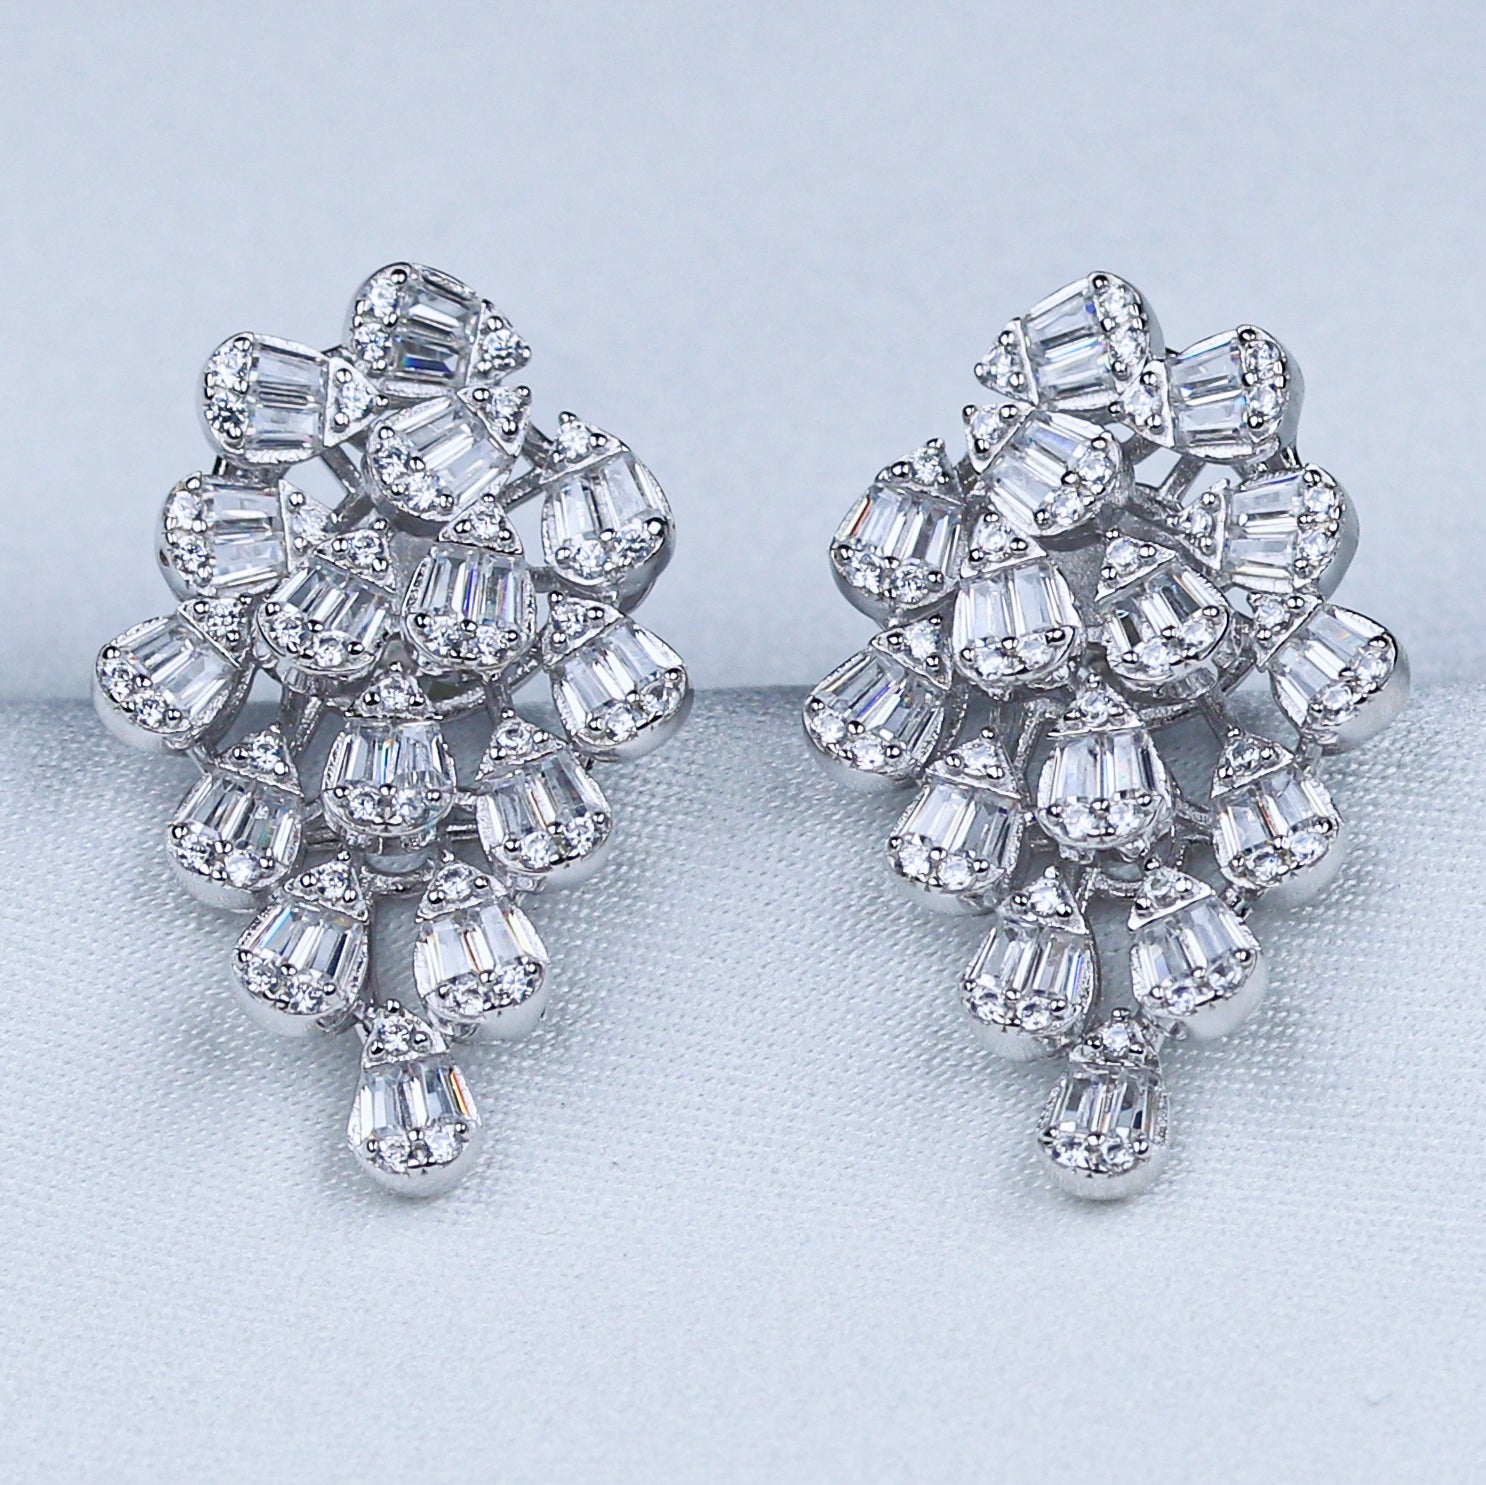 cubic zirconias solid 925 sterling silver cluster studs